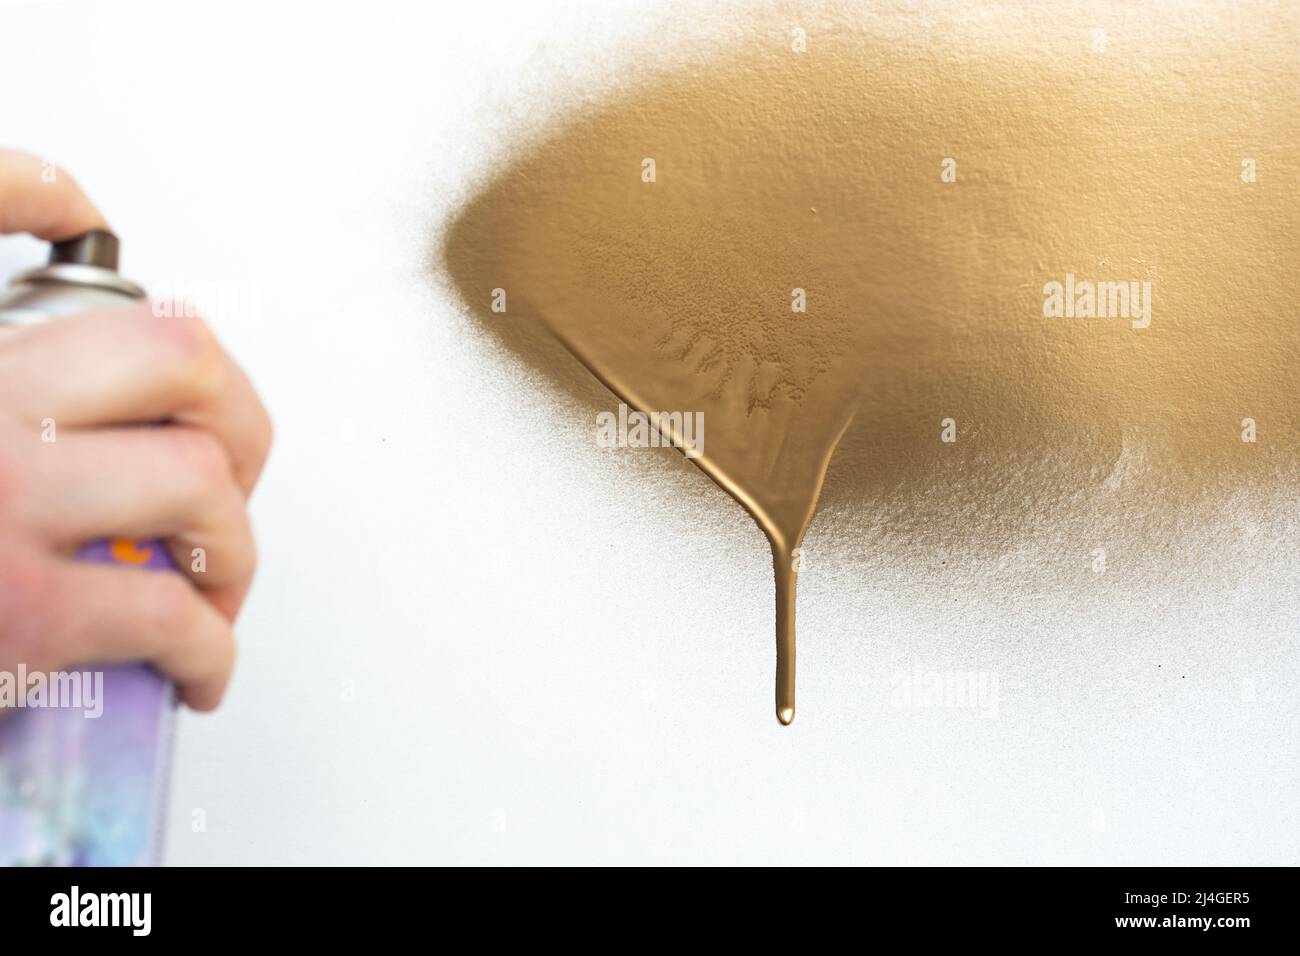 blurred hand holding a golden paint spray can, painting a white surface Stock Photo